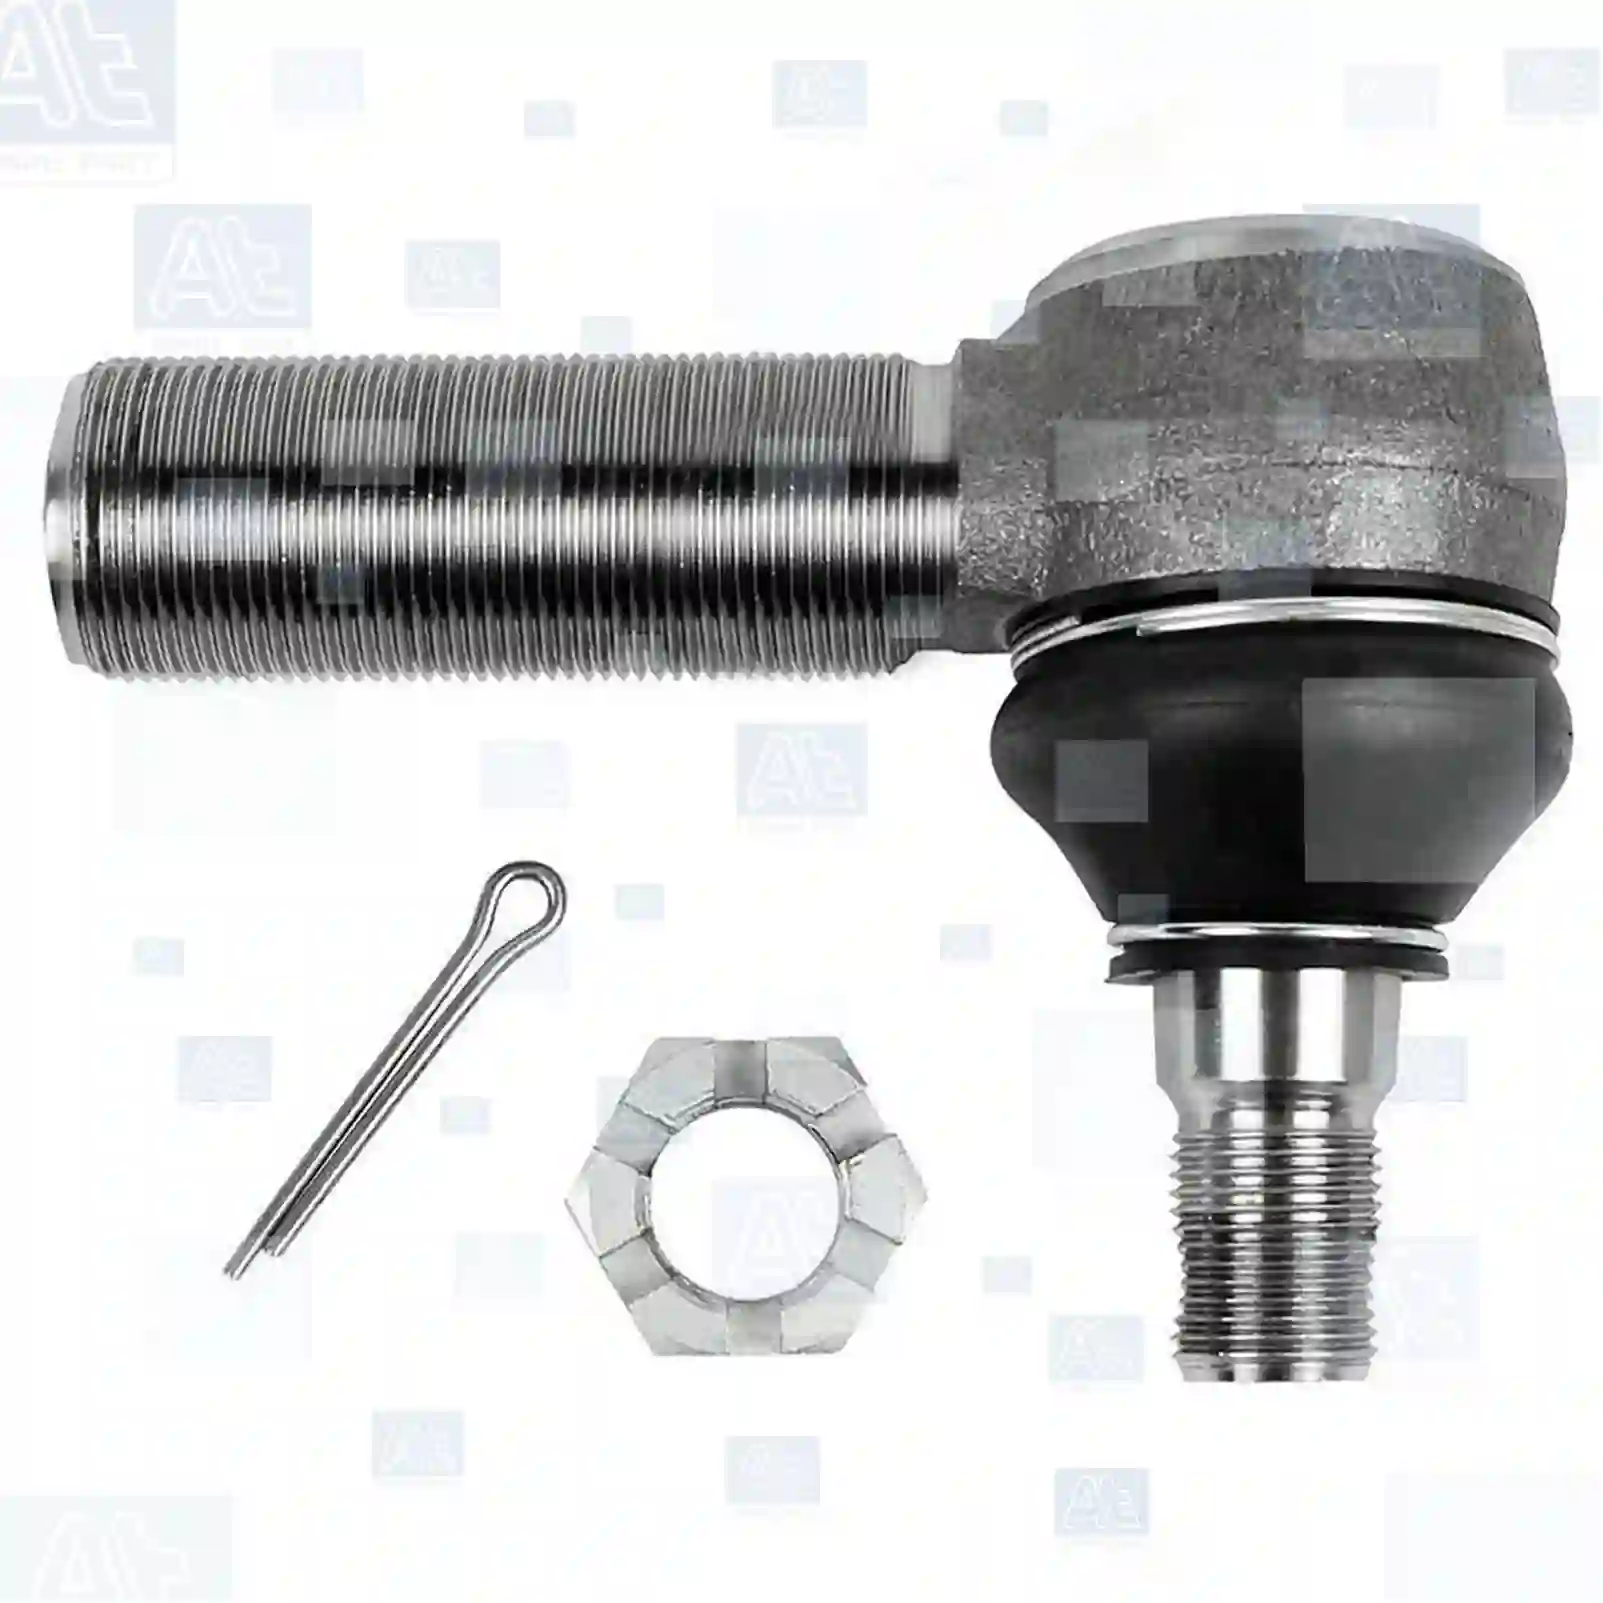 Ball joint, left hand thread, 77705367, 0110196, 0607452, 110196, 1373137, 607452, ACU9241, 02969507, 04833826, 08123394, 08193646, 08558536, 42484887, 02969507, 04833826, 08123394, 08193646, 08558536, 2969507, 42484887, 4833826, 8123394, 8193646, 8558536, 81953010079, 81953016139, 81953016222, 81953016315, 81953016329, 81953016359, 0003303335, 0003307235, 0003309435, 0003309635, 0023301235, 3443307235, 120325702, 5000559336, 5000823947, 5000823997, 5001825927, 1517279, 1517439, 1517493, 1695511, 1698190, ZG40355-0008 ||  77705367 At Spare Part | Engine, Accelerator Pedal, Camshaft, Connecting Rod, Crankcase, Crankshaft, Cylinder Head, Engine Suspension Mountings, Exhaust Manifold, Exhaust Gas Recirculation, Filter Kits, Flywheel Housing, General Overhaul Kits, Engine, Intake Manifold, Oil Cleaner, Oil Cooler, Oil Filter, Oil Pump, Oil Sump, Piston & Liner, Sensor & Switch, Timing Case, Turbocharger, Cooling System, Belt Tensioner, Coolant Filter, Coolant Pipe, Corrosion Prevention Agent, Drive, Expansion Tank, Fan, Intercooler, Monitors & Gauges, Radiator, Thermostat, V-Belt / Timing belt, Water Pump, Fuel System, Electronical Injector Unit, Feed Pump, Fuel Filter, cpl., Fuel Gauge Sender,  Fuel Line, Fuel Pump, Fuel Tank, Injection Line Kit, Injection Pump, Exhaust System, Clutch & Pedal, Gearbox, Propeller Shaft, Axles, Brake System, Hubs & Wheels, Suspension, Leaf Spring, Universal Parts / Accessories, Steering, Electrical System, Cabin Ball joint, left hand thread, 77705367, 0110196, 0607452, 110196, 1373137, 607452, ACU9241, 02969507, 04833826, 08123394, 08193646, 08558536, 42484887, 02969507, 04833826, 08123394, 08193646, 08558536, 2969507, 42484887, 4833826, 8123394, 8193646, 8558536, 81953010079, 81953016139, 81953016222, 81953016315, 81953016329, 81953016359, 0003303335, 0003307235, 0003309435, 0003309635, 0023301235, 3443307235, 120325702, 5000559336, 5000823947, 5000823997, 5001825927, 1517279, 1517439, 1517493, 1695511, 1698190, ZG40355-0008 ||  77705367 At Spare Part | Engine, Accelerator Pedal, Camshaft, Connecting Rod, Crankcase, Crankshaft, Cylinder Head, Engine Suspension Mountings, Exhaust Manifold, Exhaust Gas Recirculation, Filter Kits, Flywheel Housing, General Overhaul Kits, Engine, Intake Manifold, Oil Cleaner, Oil Cooler, Oil Filter, Oil Pump, Oil Sump, Piston & Liner, Sensor & Switch, Timing Case, Turbocharger, Cooling System, Belt Tensioner, Coolant Filter, Coolant Pipe, Corrosion Prevention Agent, Drive, Expansion Tank, Fan, Intercooler, Monitors & Gauges, Radiator, Thermostat, V-Belt / Timing belt, Water Pump, Fuel System, Electronical Injector Unit, Feed Pump, Fuel Filter, cpl., Fuel Gauge Sender,  Fuel Line, Fuel Pump, Fuel Tank, Injection Line Kit, Injection Pump, Exhaust System, Clutch & Pedal, Gearbox, Propeller Shaft, Axles, Brake System, Hubs & Wheels, Suspension, Leaf Spring, Universal Parts / Accessories, Steering, Electrical System, Cabin